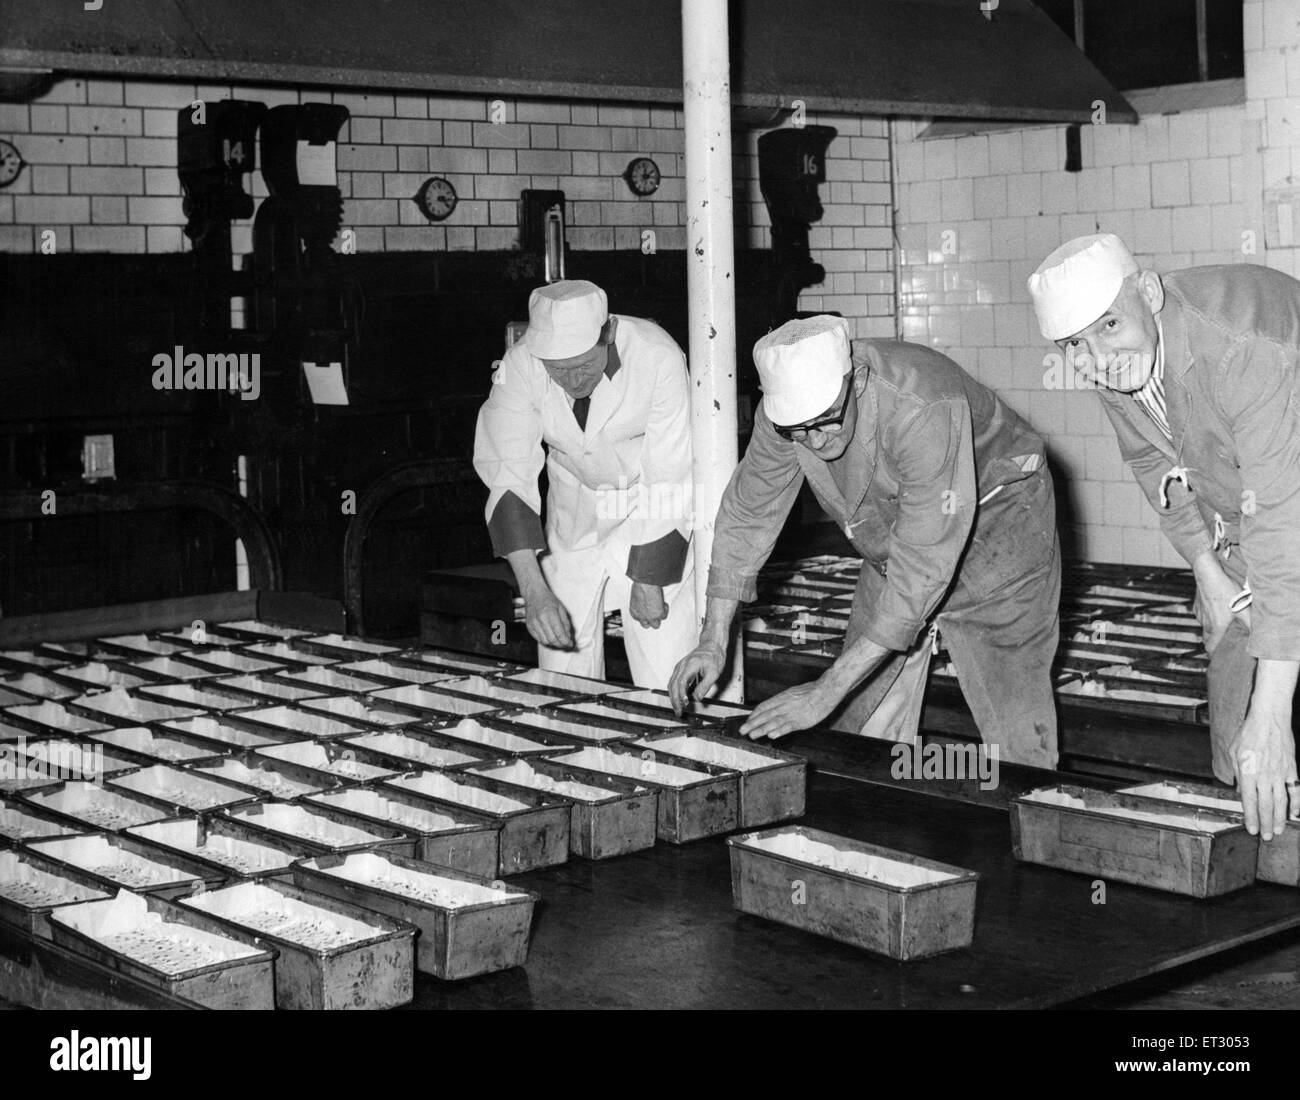 Export 'Dundee' cakes are loaded onto the oven trays in the Avana Bakery, Cardiff. Mr J March, ovens manager (left) with Mr E Watts and Mr F Whitmore, ovensmen. January 1965. Stock Photo